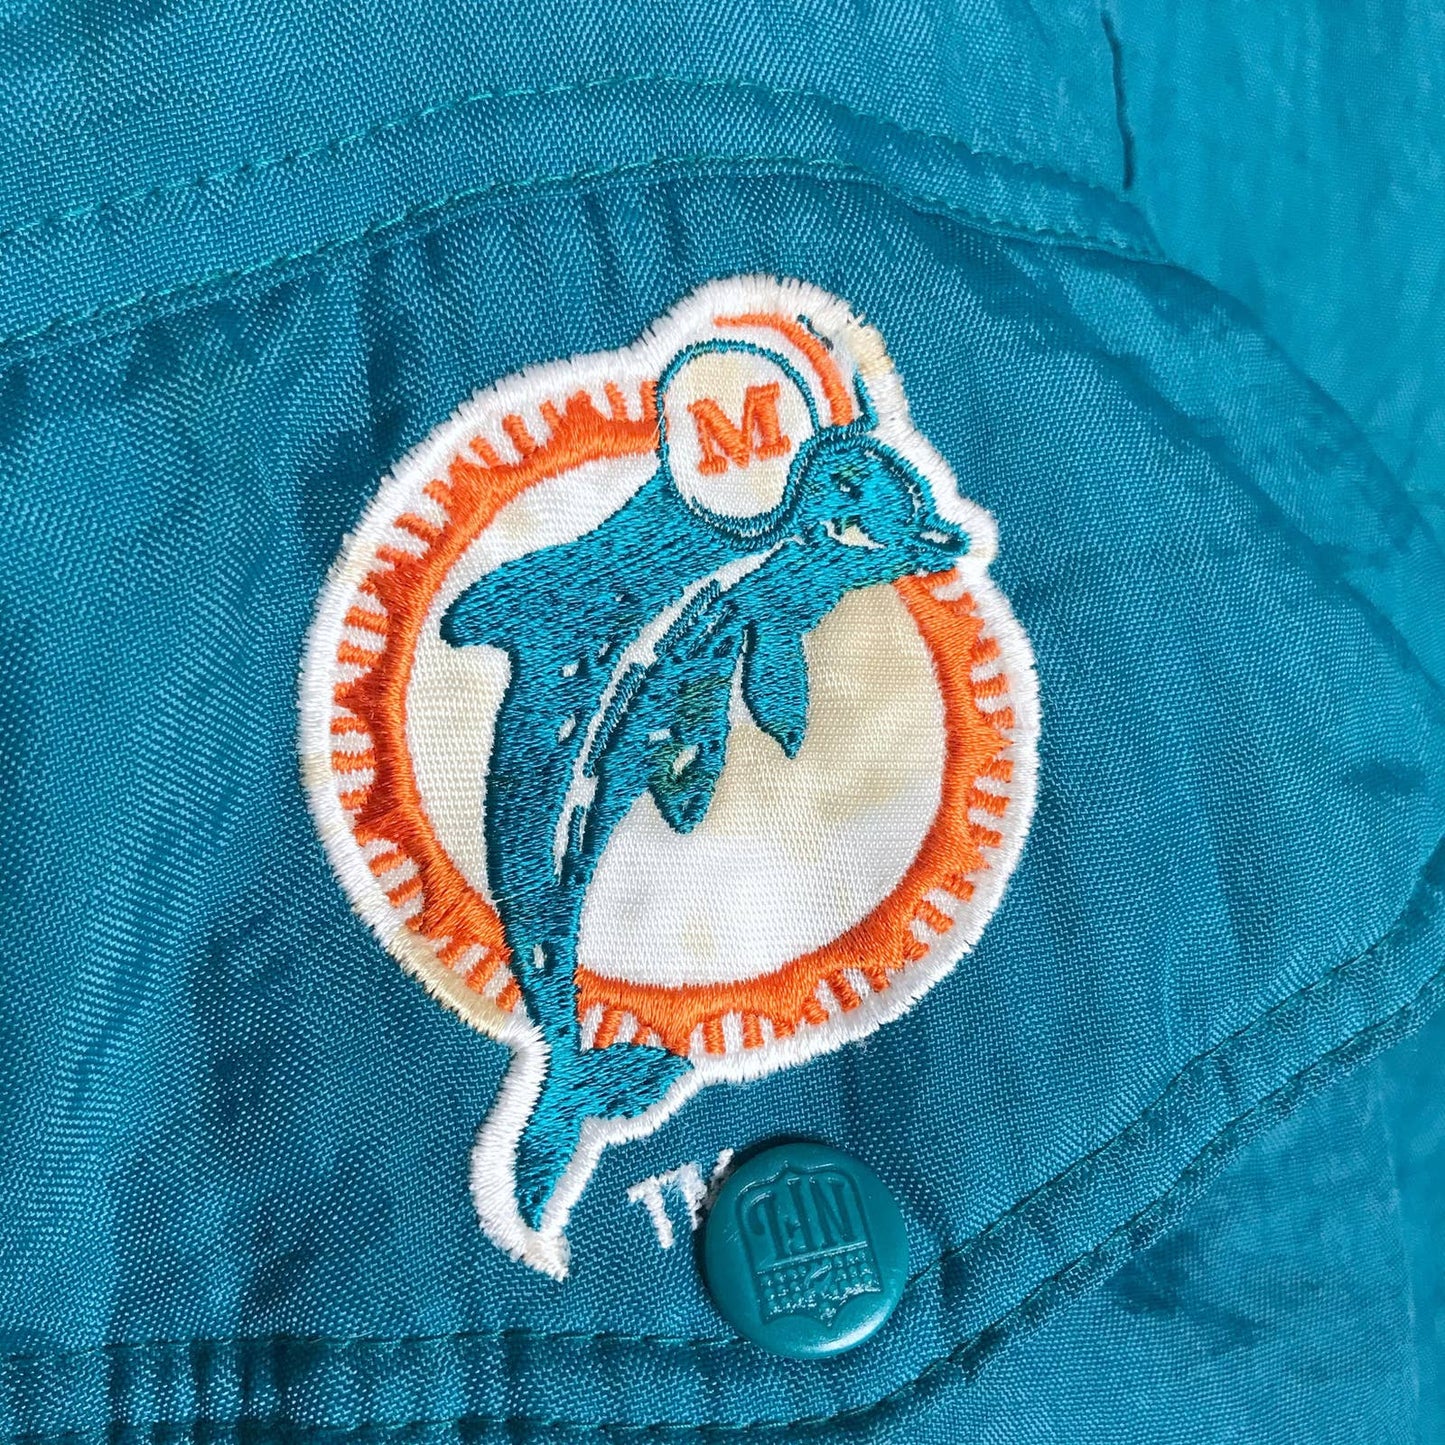 Vintage 90s Youth Reversible ProPlayer Puffer Coat Miami Dolphins NFL Football